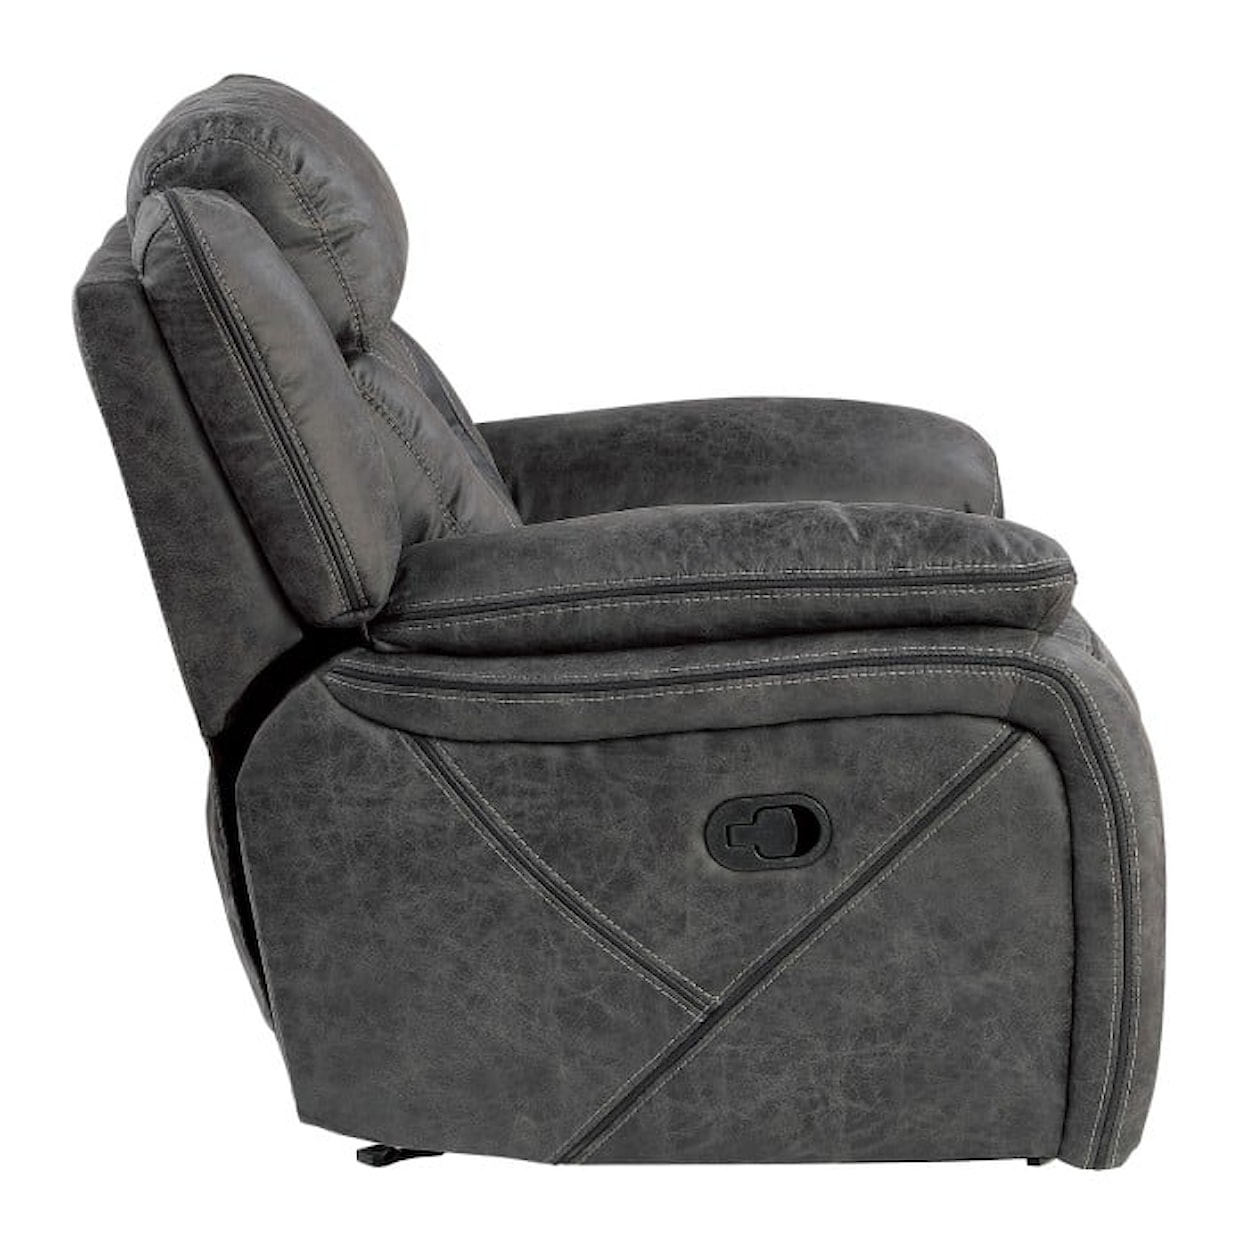 Homelegance Hill Madrona Glider Reclining Chair